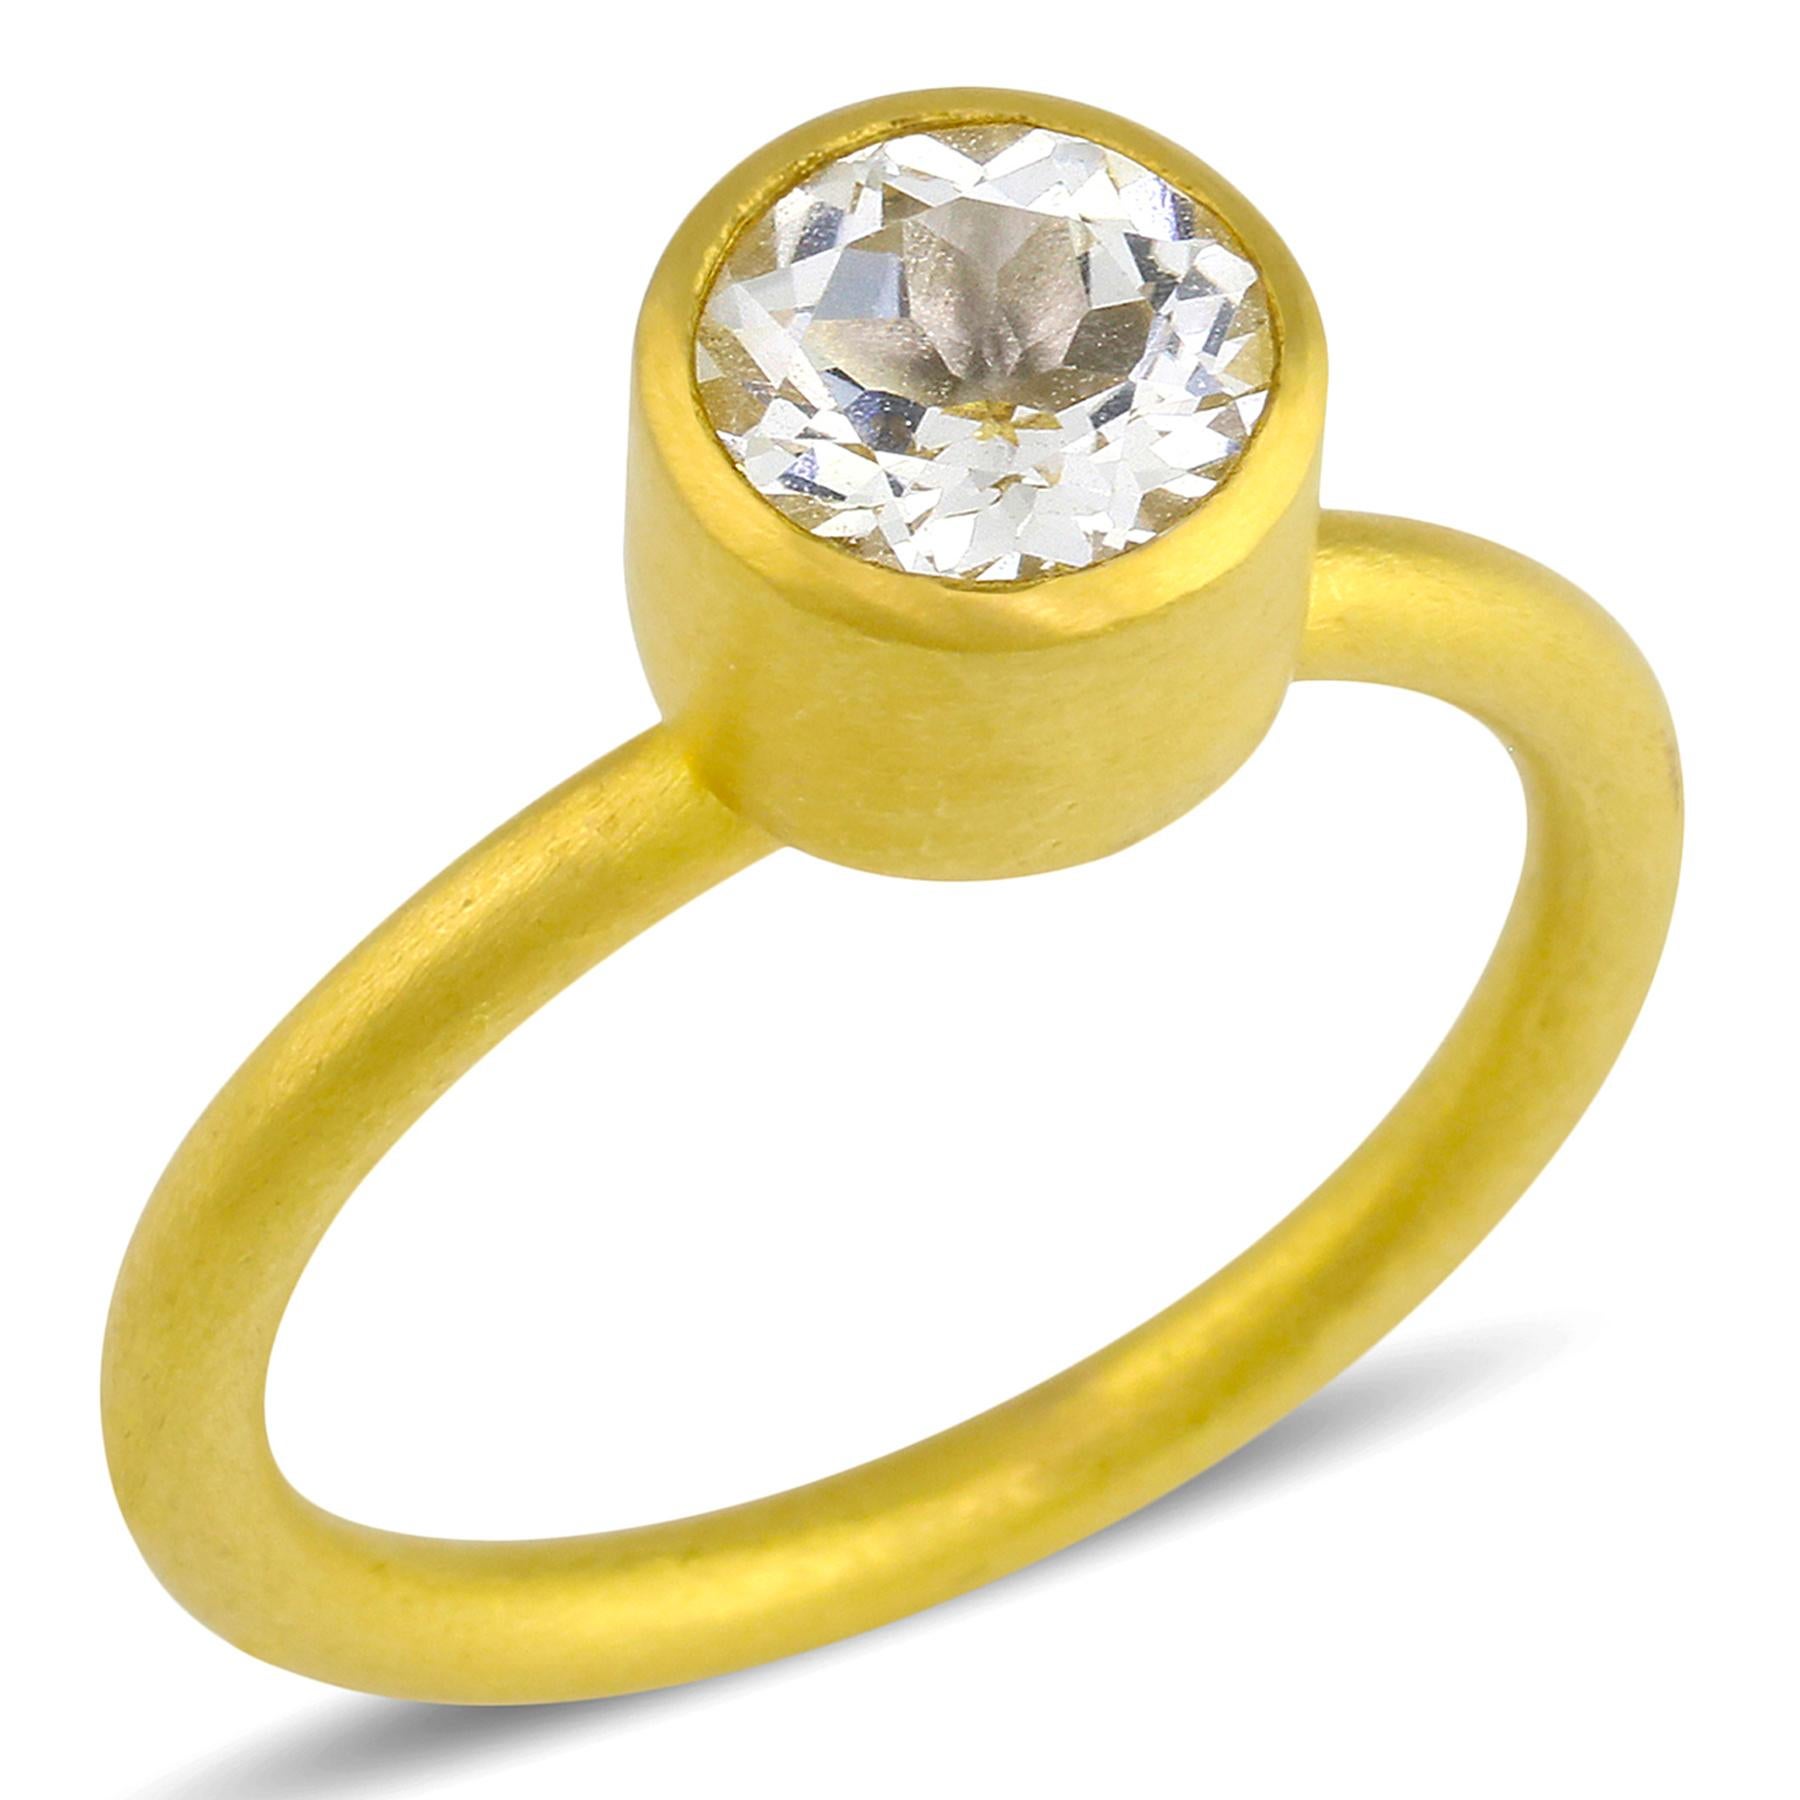 PHILIPPE-SPENCER -  1.6 Ct. Clear Faceted Topaz wrapped in 22K Gold Bezel with Solid Round 20K Gold Ring. Brushed Matte Finish. Size 6 1/8, and is in-stock and ready to ship. Our apologies in advance, this One-Of-A-Kind Solitaire is not resizable.